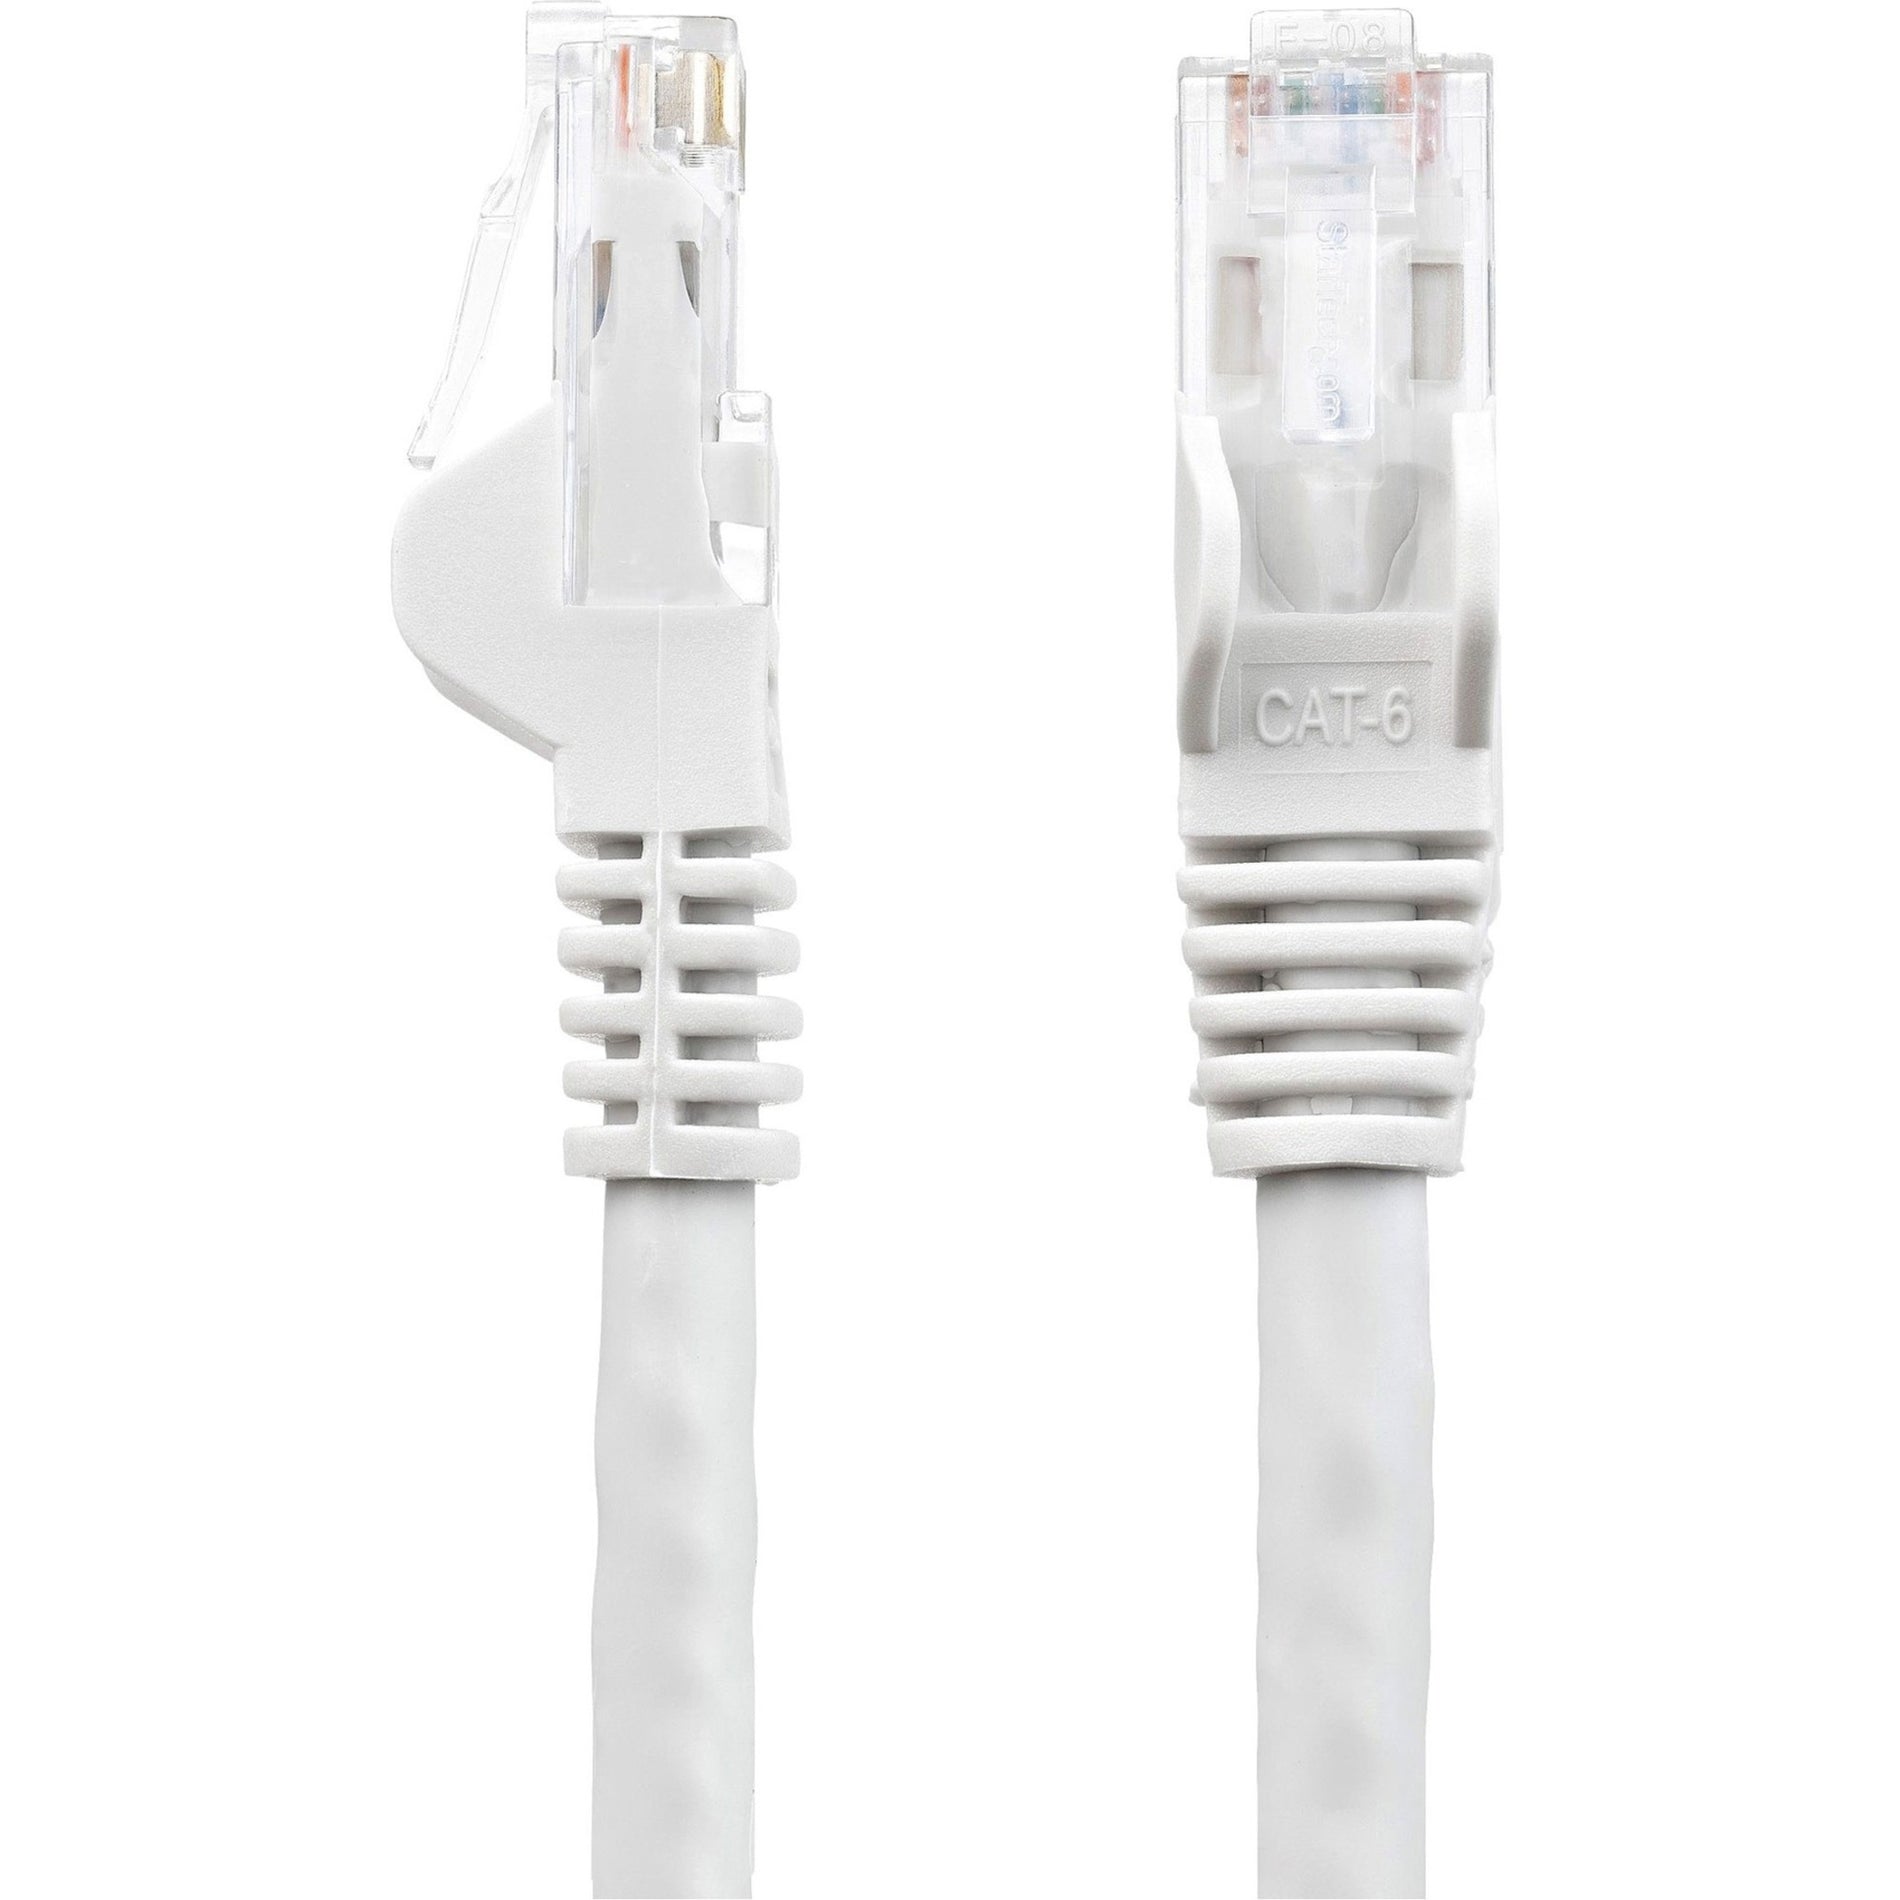 StarTech.com N6PATCH10WH 10 ft White Snagless Cat6 UTP Patch Cable, 10 Gbit/s Data Transfer Rate, Lifetime Warranty